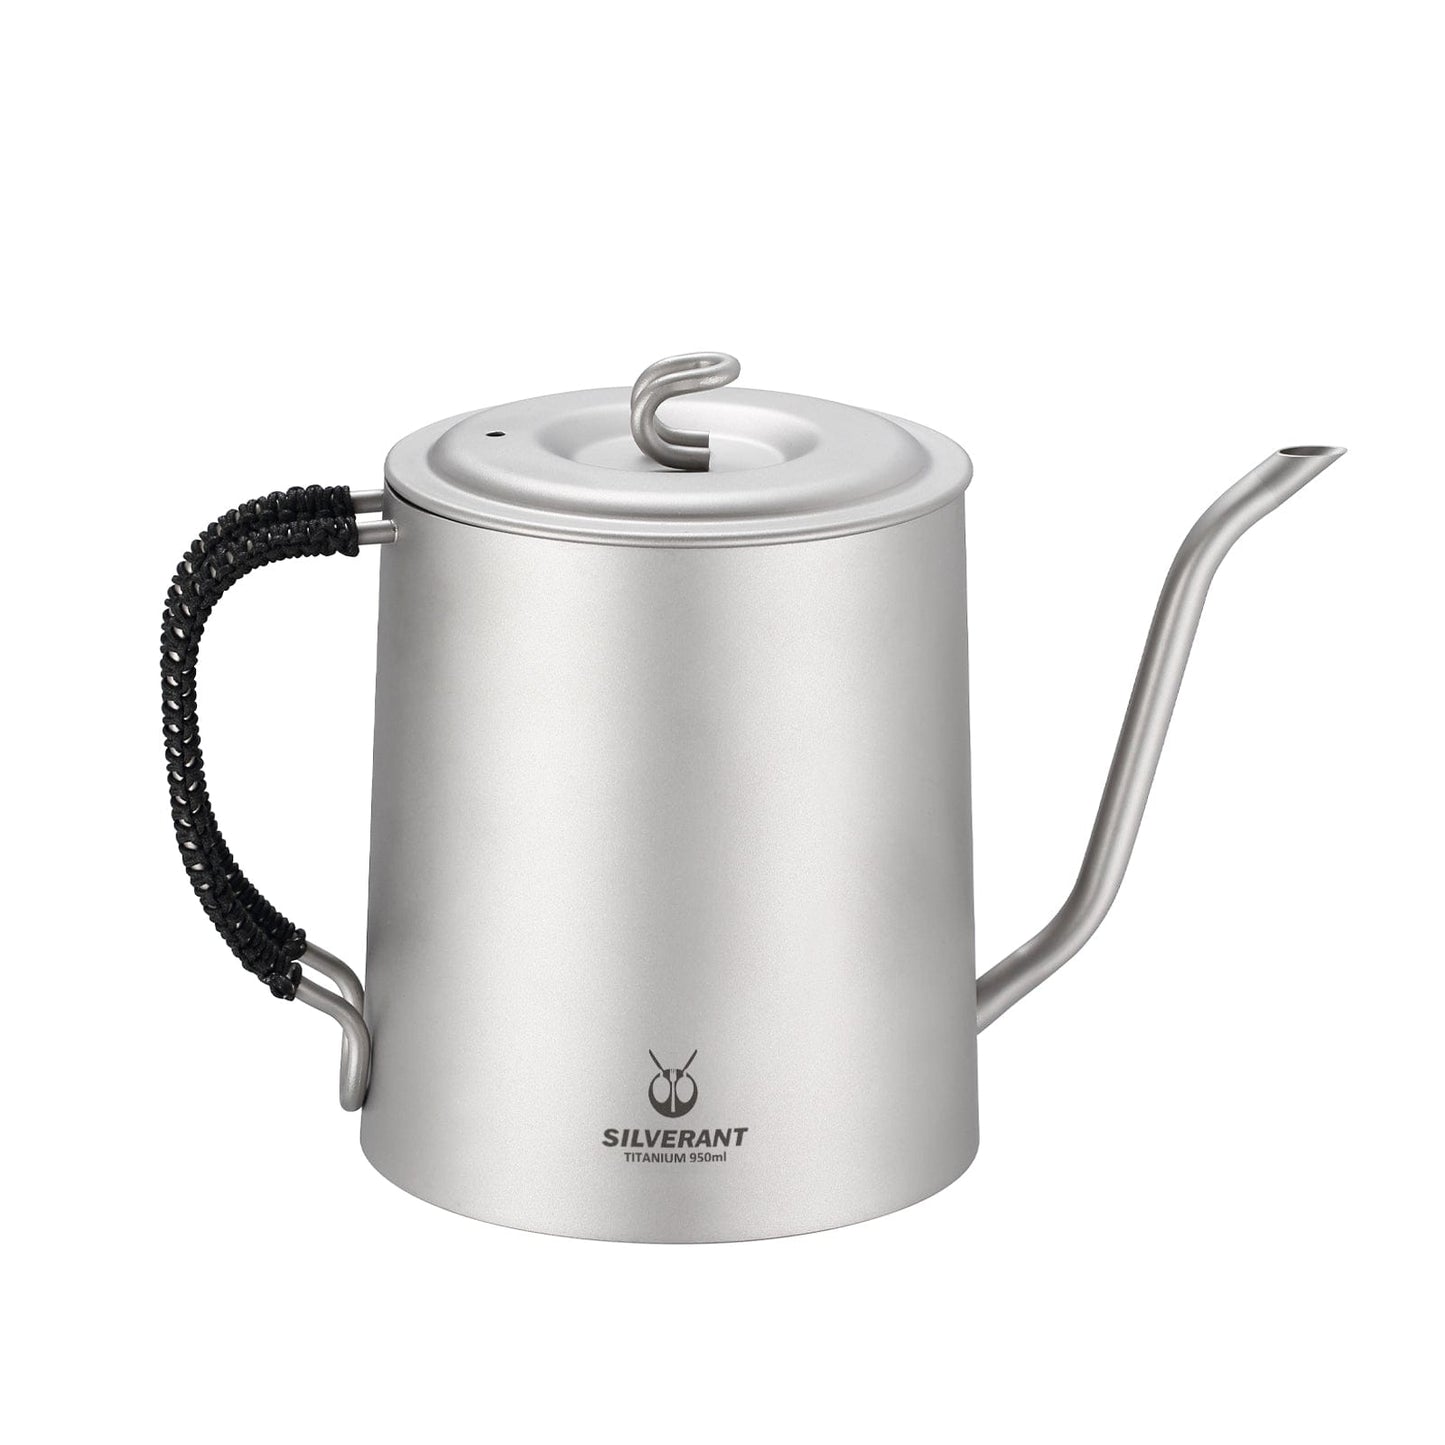 SilverAnt Ultralight Titanium Pour Over Kettle 950ml/33.4 fl oz - Goose Neck Pour Over Coffee & Tea Kettle - Sandblasted Gray Finish with Carry Case